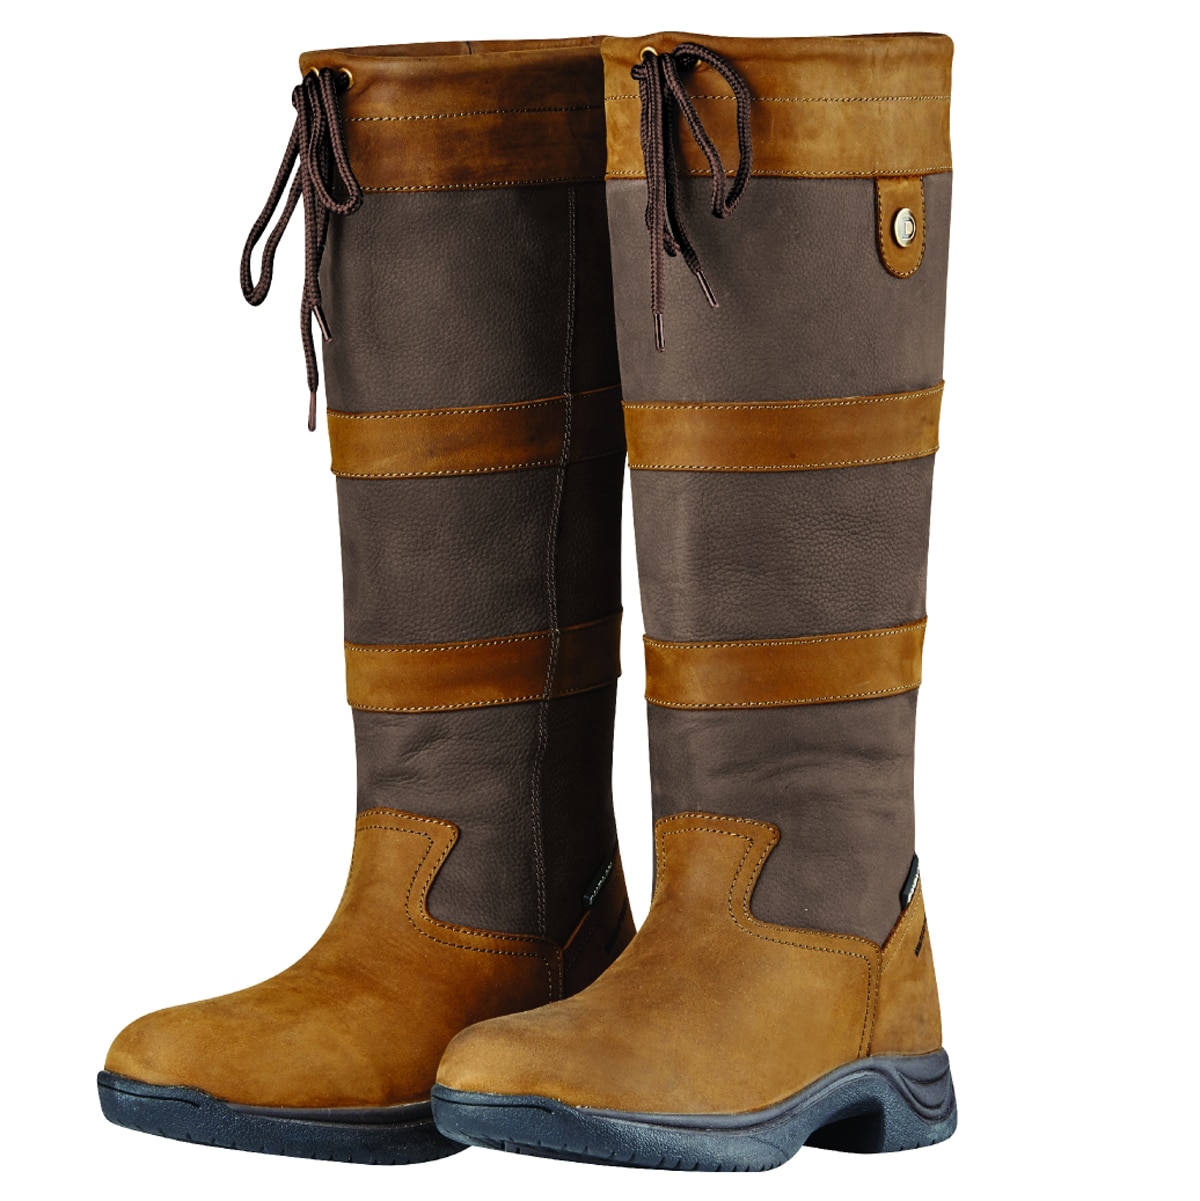 Ladies Country Waterproof Womens Boots Tall Long Riding Horse Boots Brown UK 